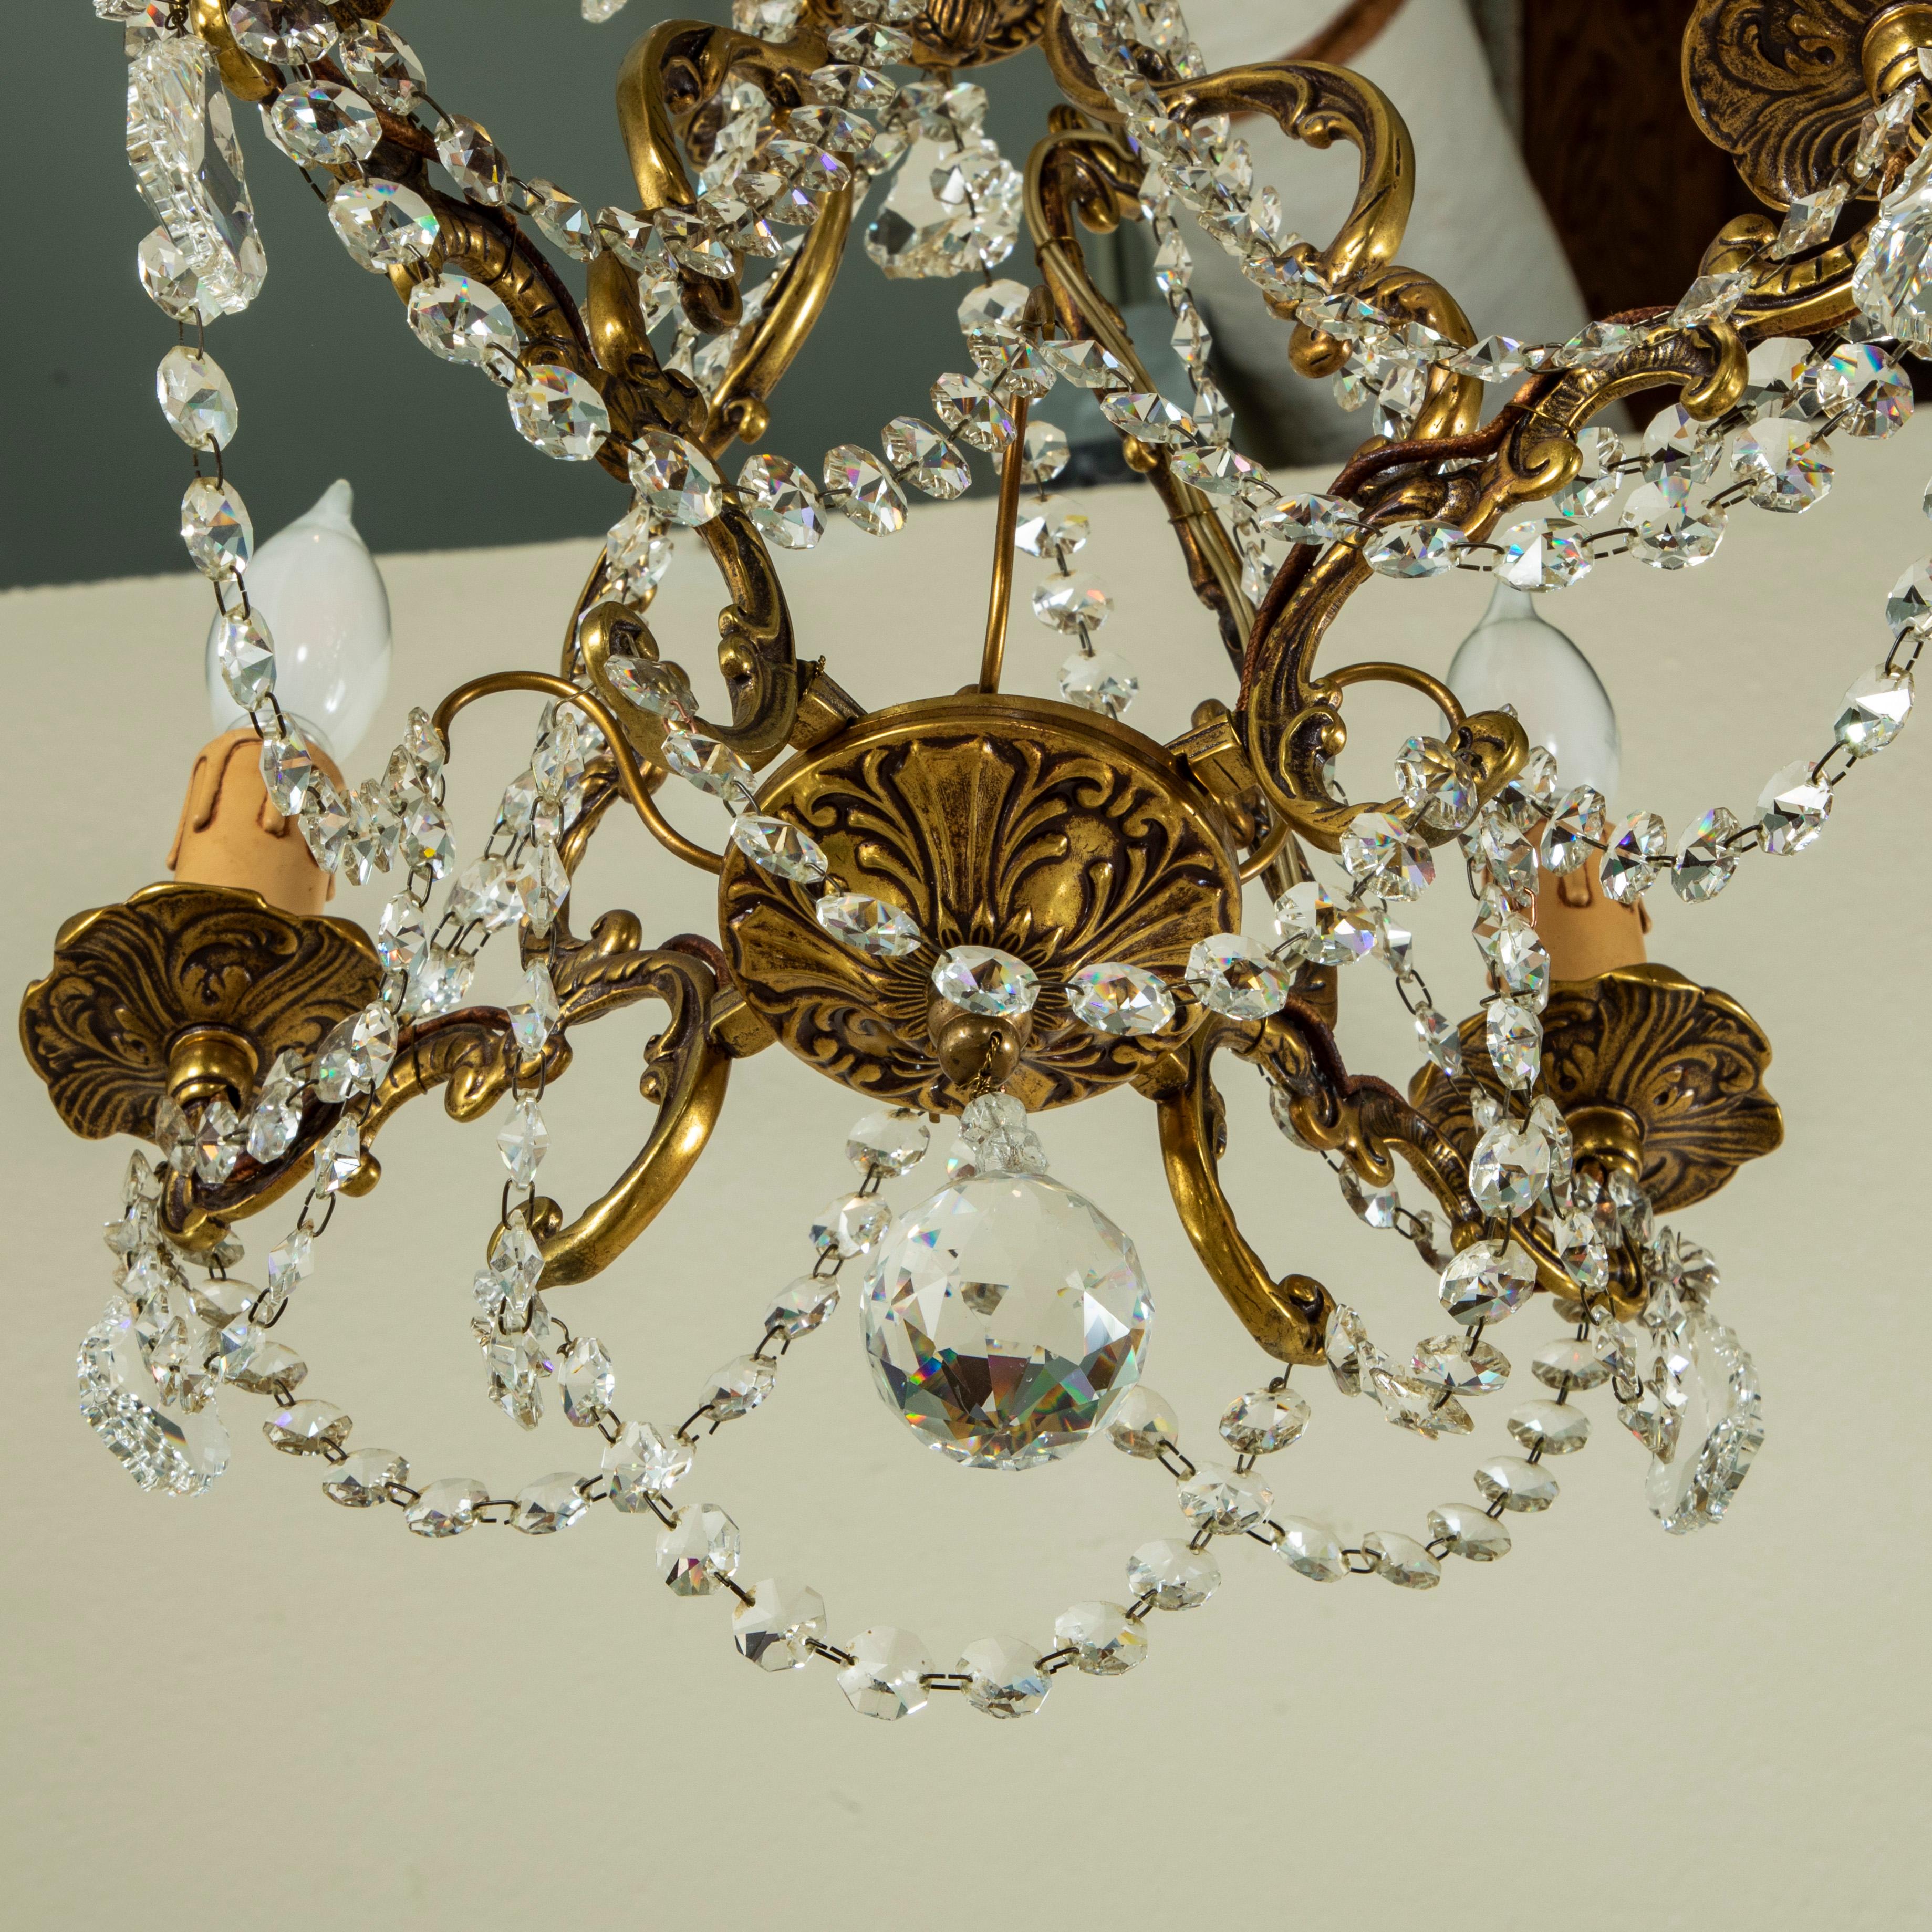 Early 20th Century Small Scale French Bronze and Strass Crystal Chandelier For Sale 3